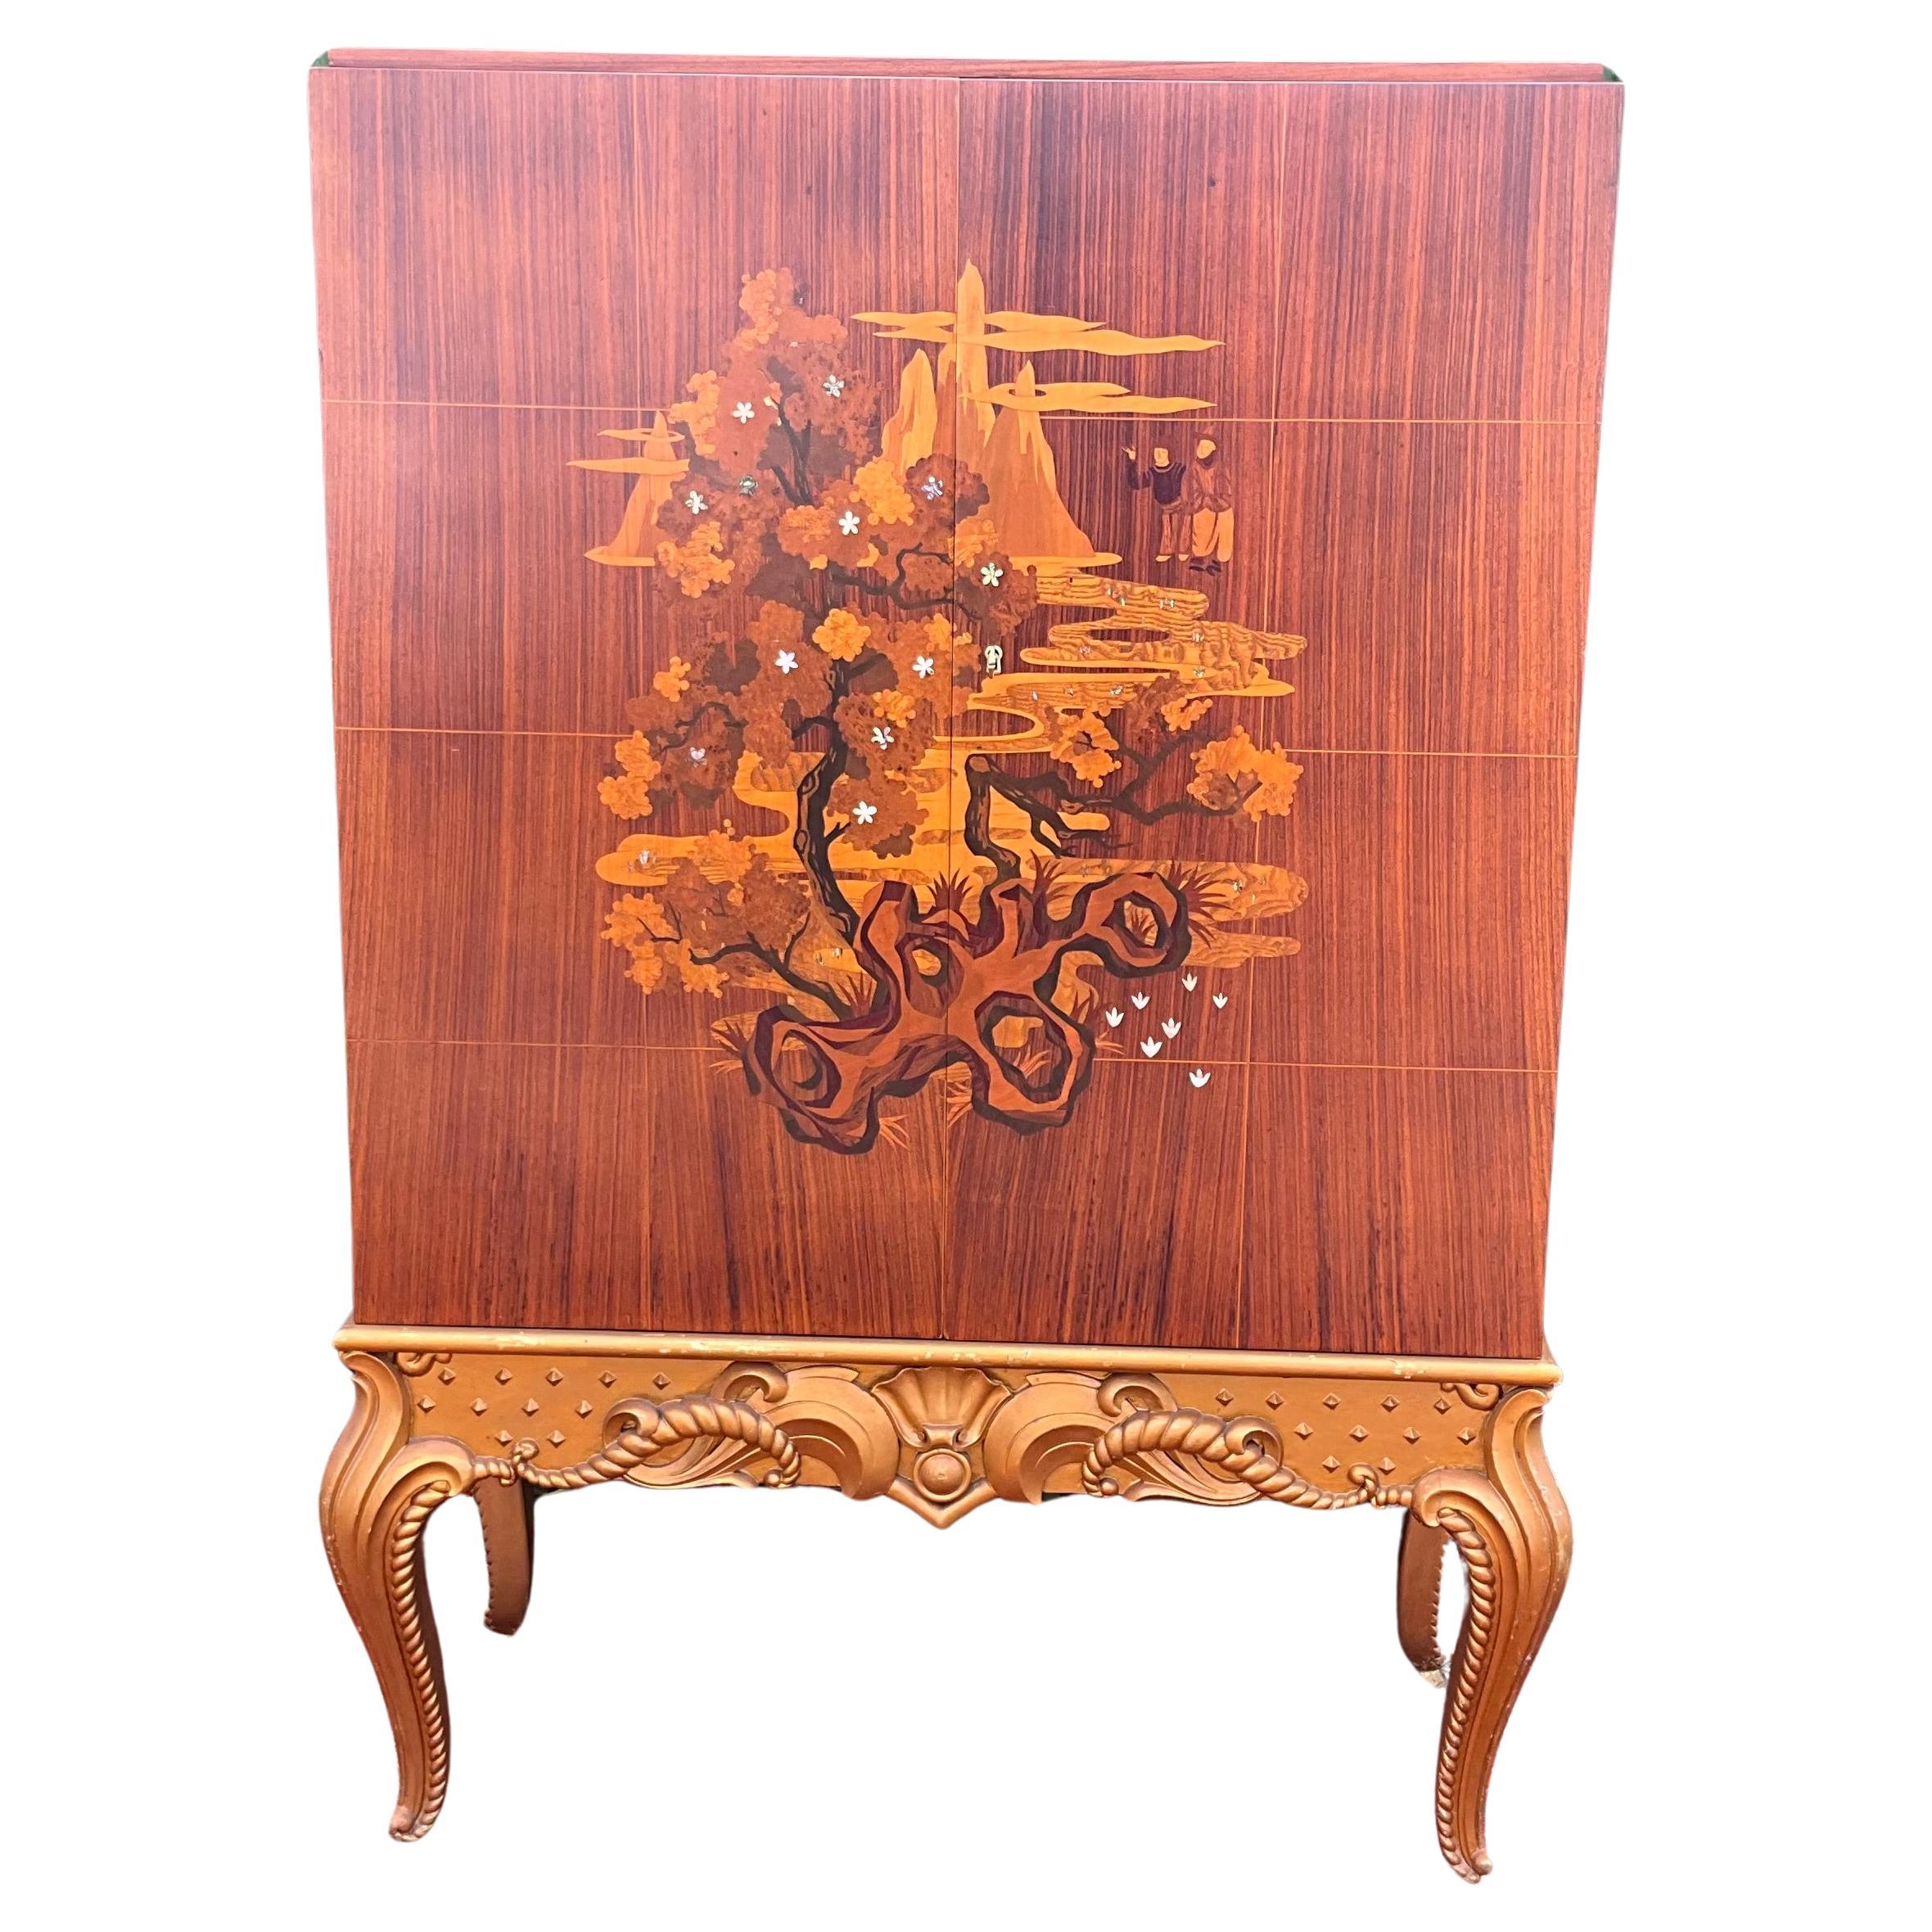 Maurice Dufrene Art Déco cabinet For Sale